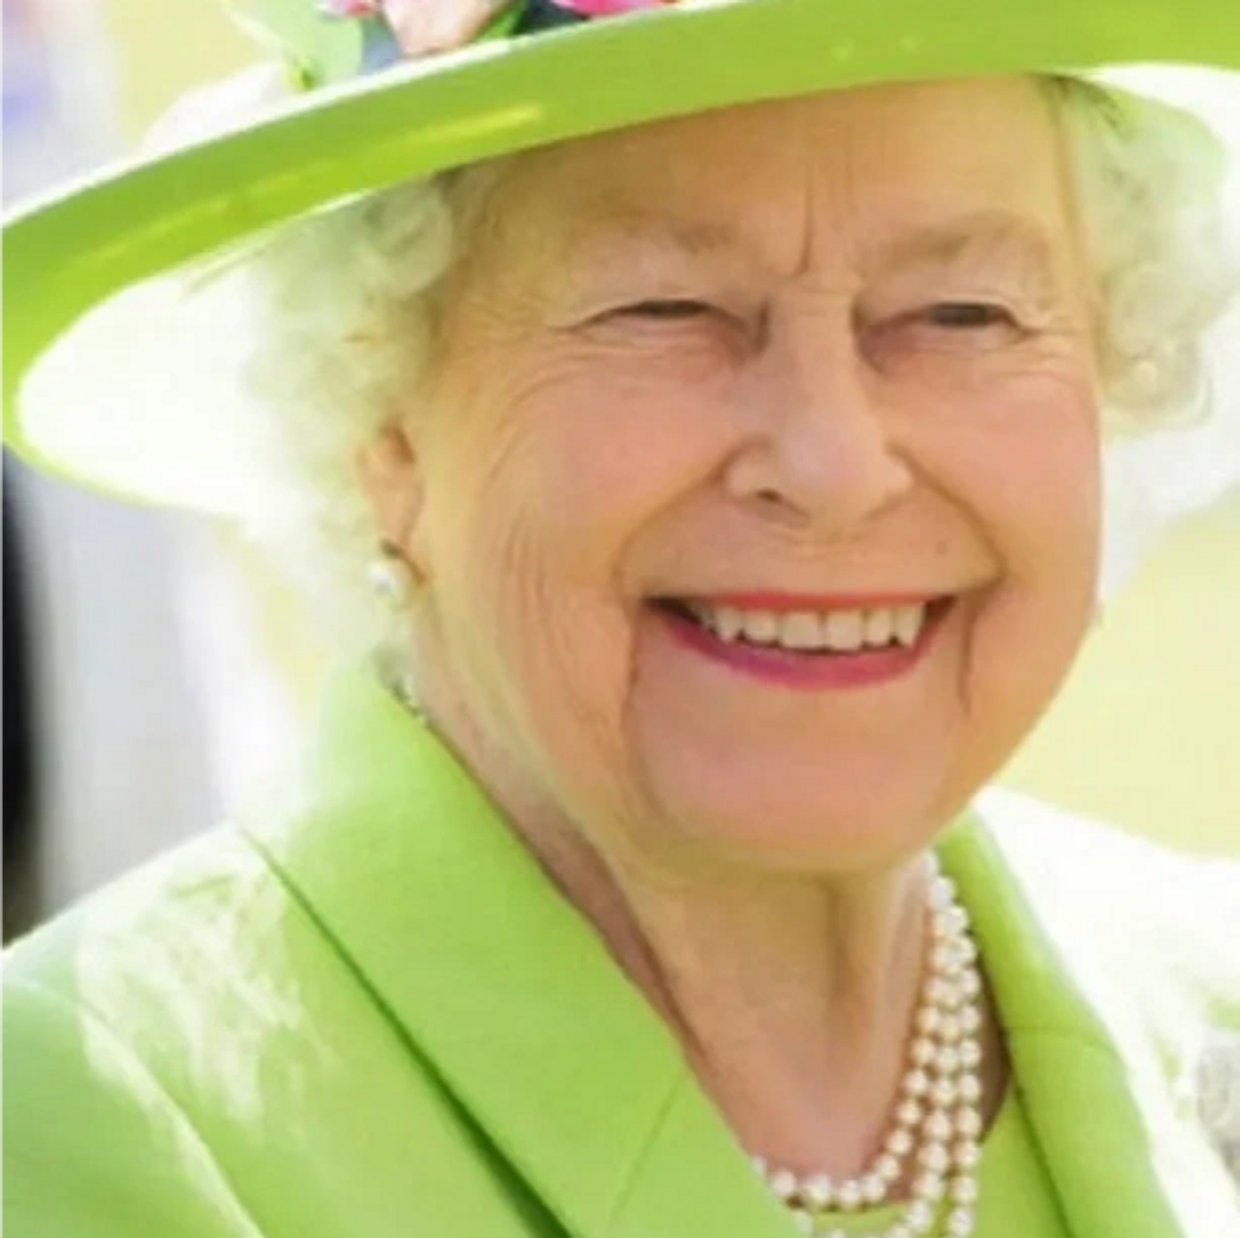 Queen Elizabeth II. Queen of the United Kingdom and the other Commonwealth realms 